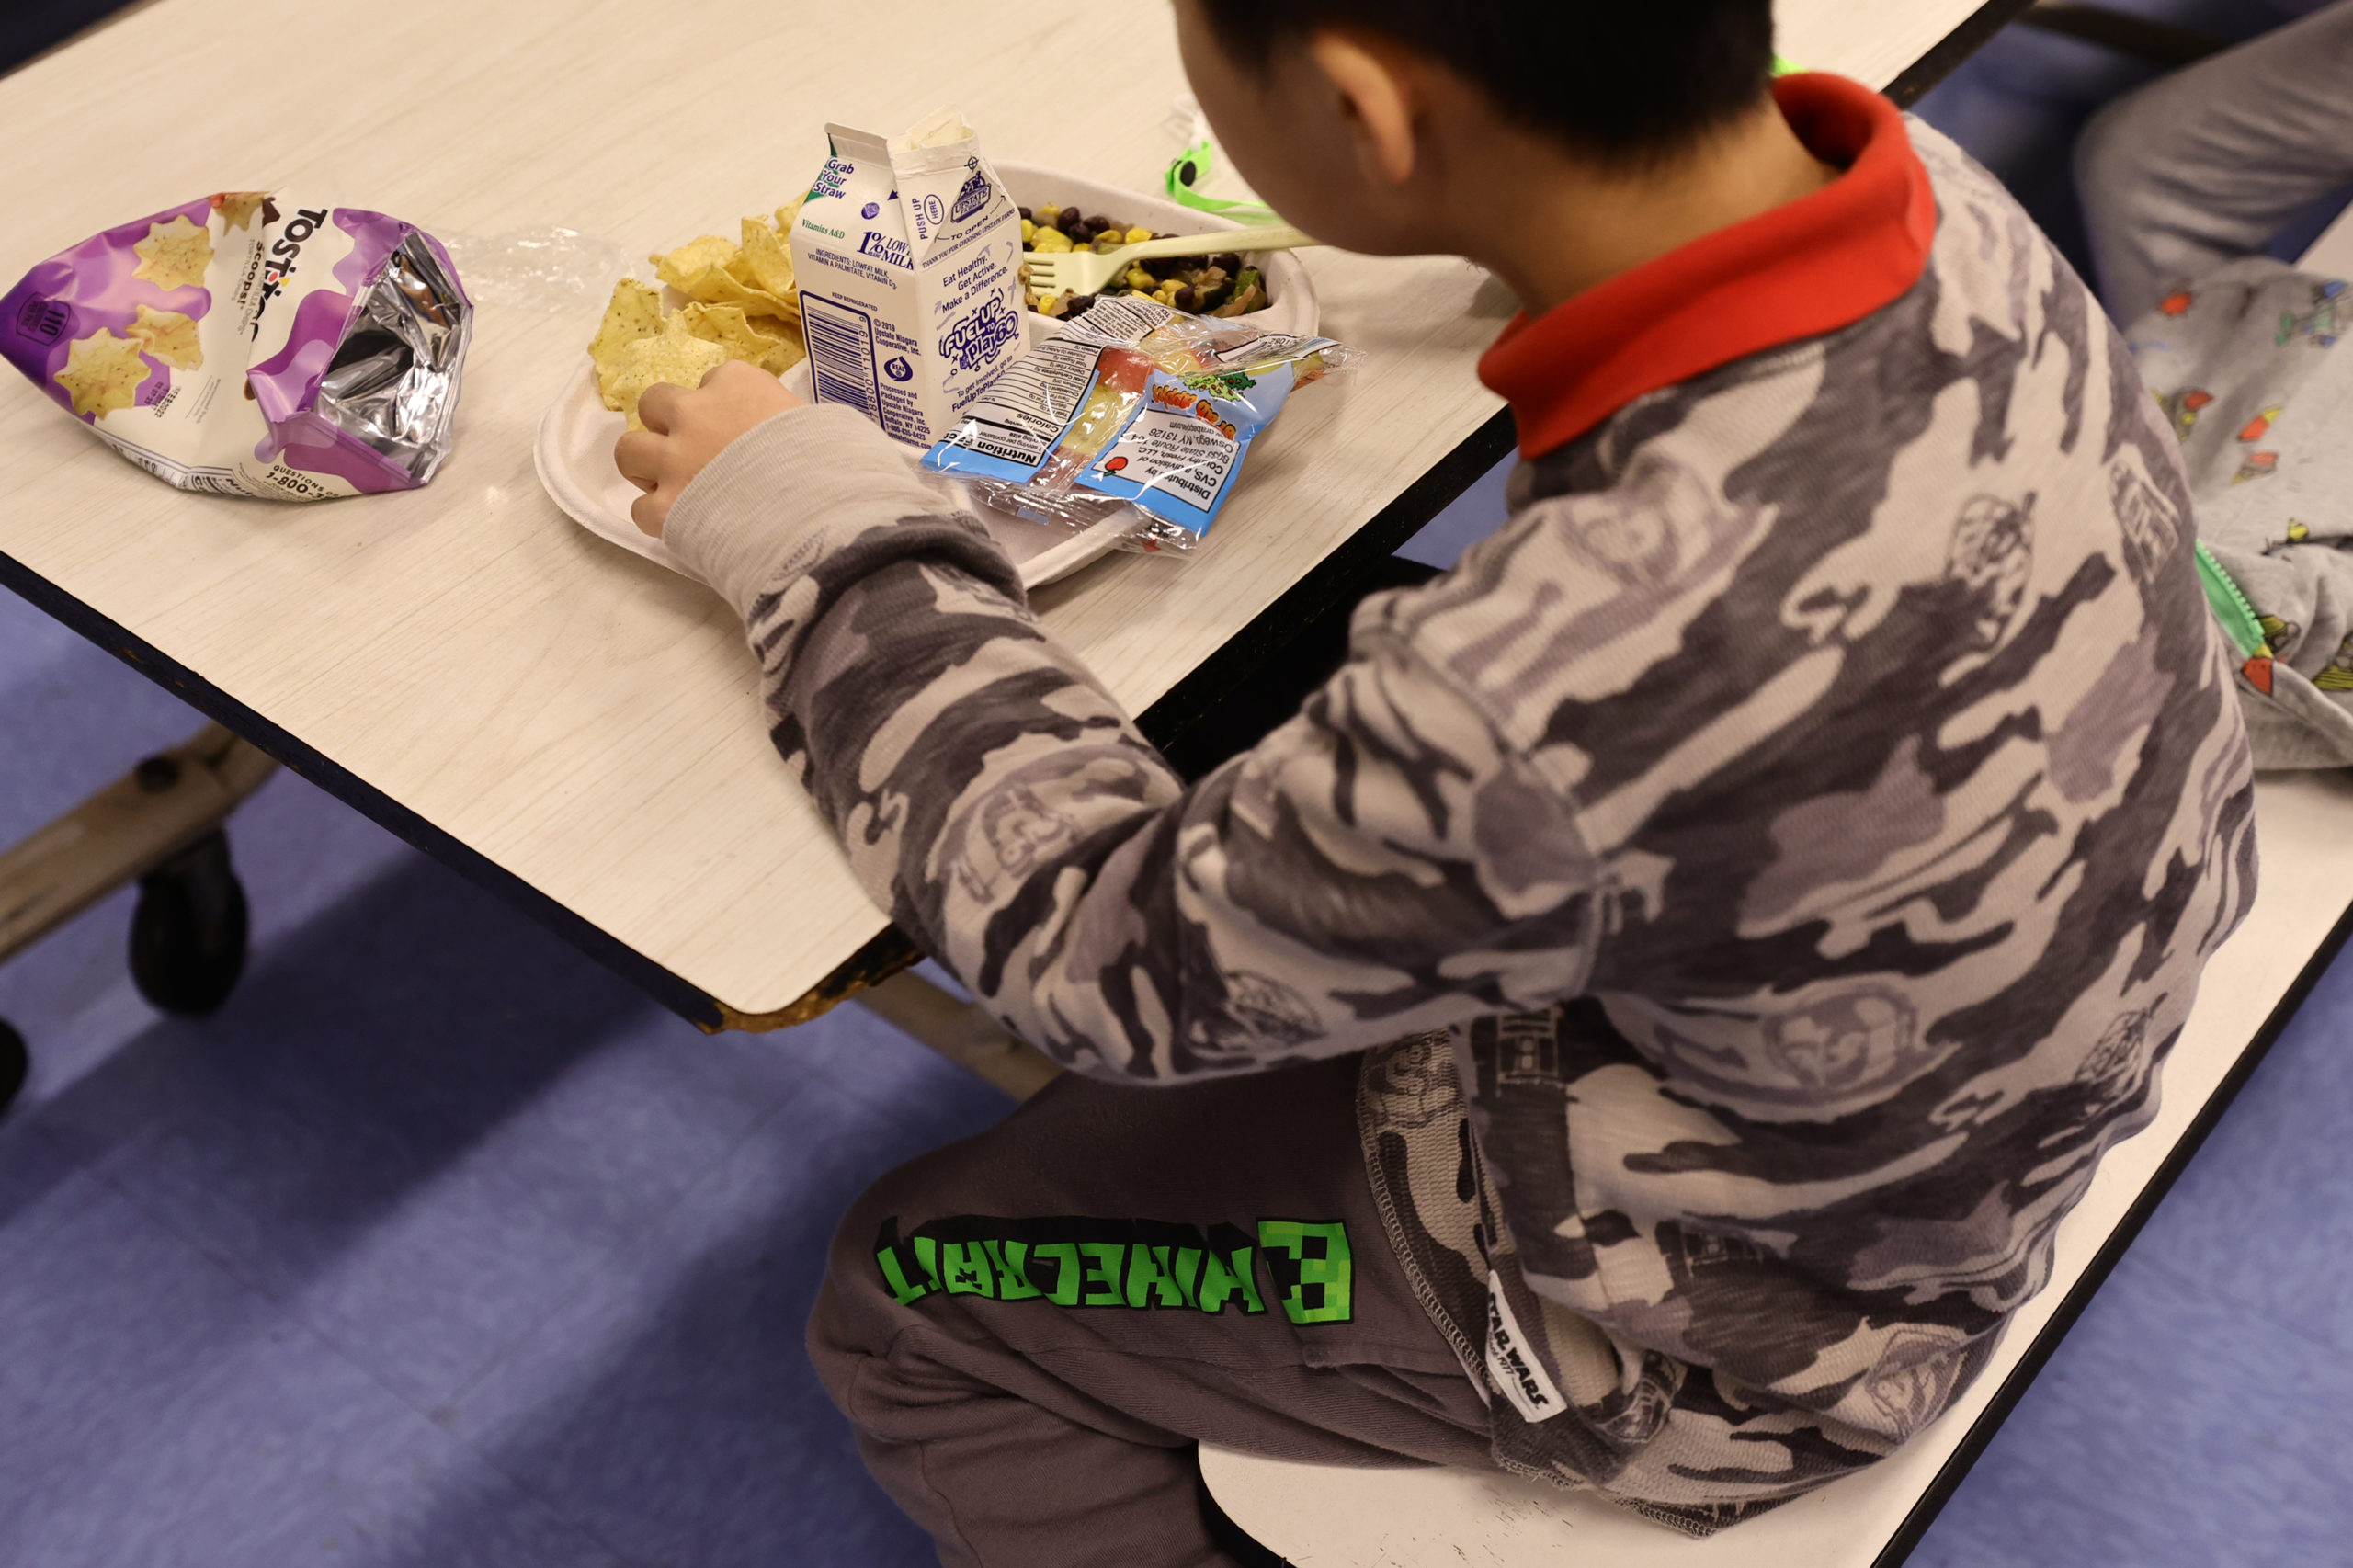 A student eats a vegan meal served for lunch (with milk as a drink) at Yung Wing School P.S. 124 on February 04, 2022 in New York City. Starting today, the Department of Education in New York City, which introduced Meatless Mondays in 2019 and Meatless Fridays this past April, will start phasing in “vegan-focused” menus on Fridays or “Vegan Fridays” as part of Mayor Eric Adams’ initiative to serve healthier food to students. (Photo by Michael Loccisano/Getty Images)